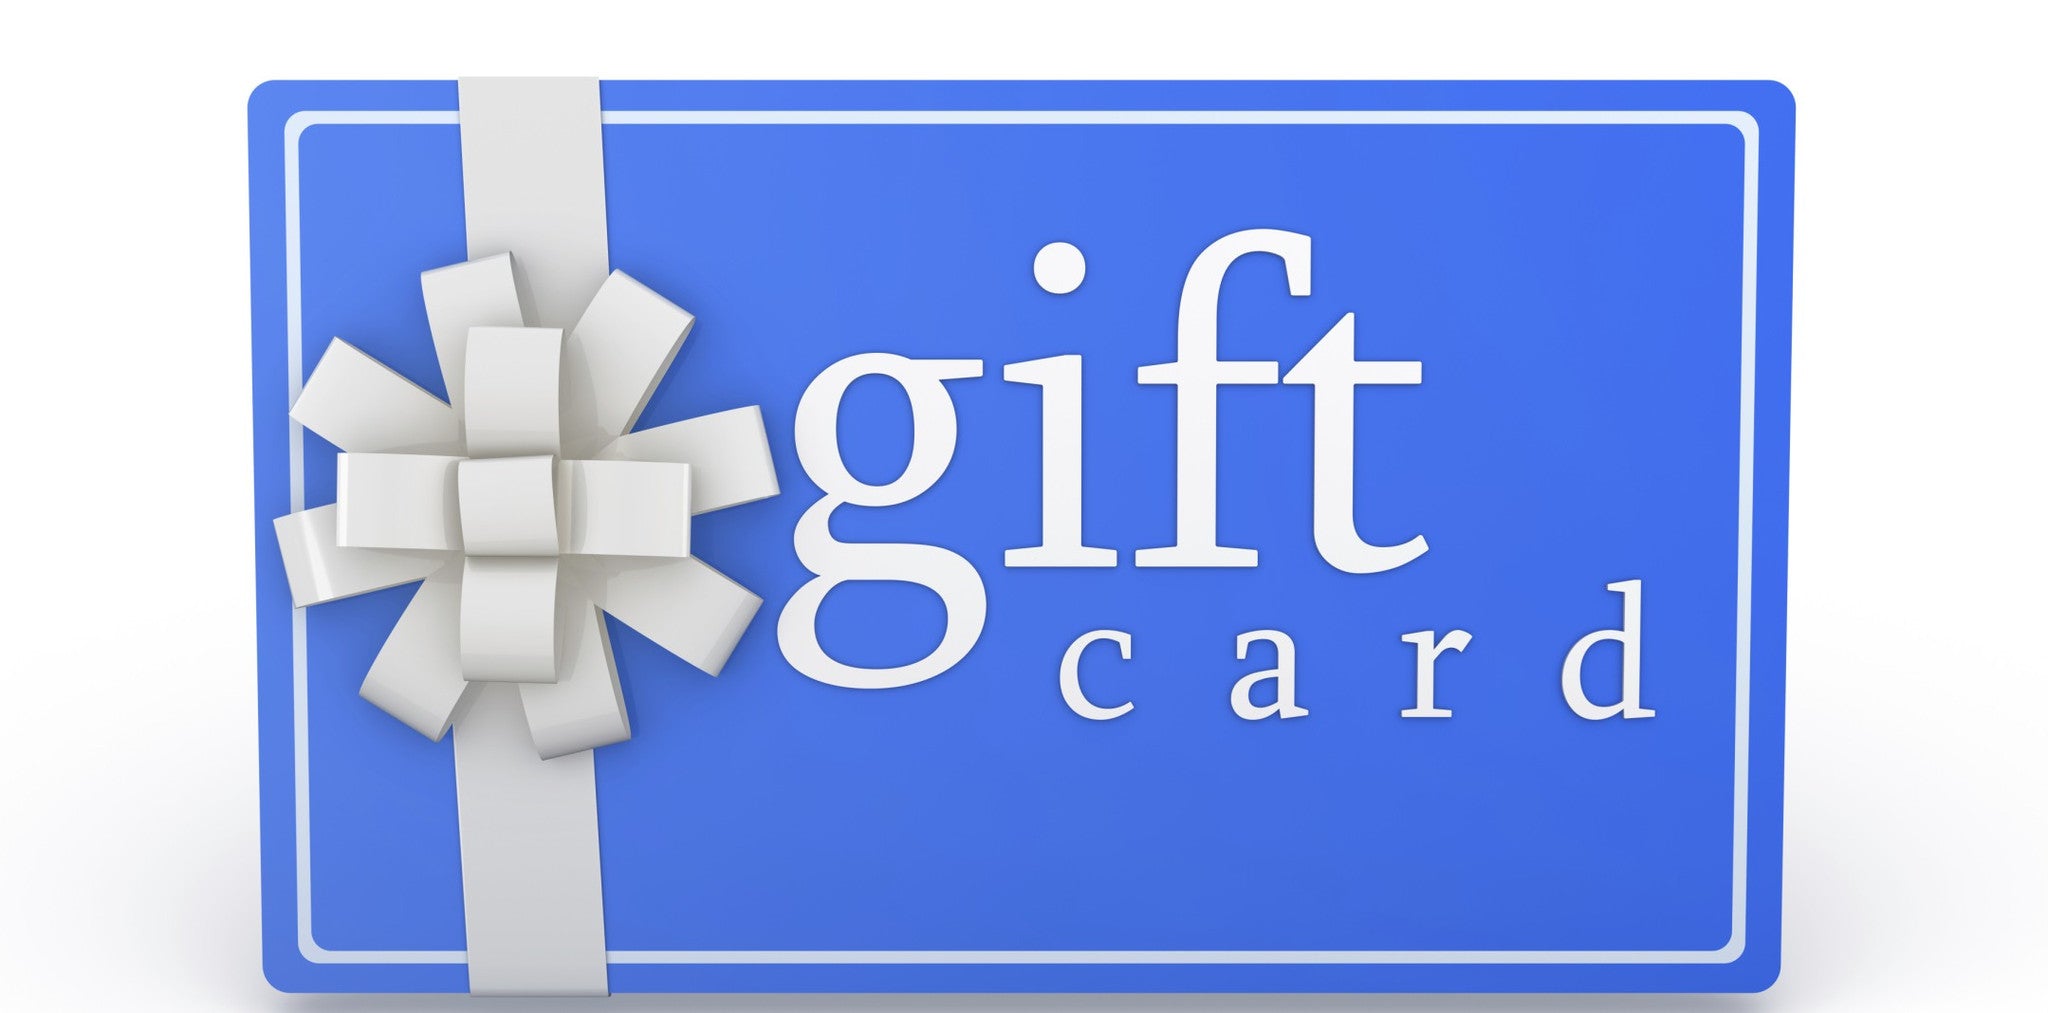 Giant Gift Cards - Don't give those little Gift Cards. Make a BIG IMPA